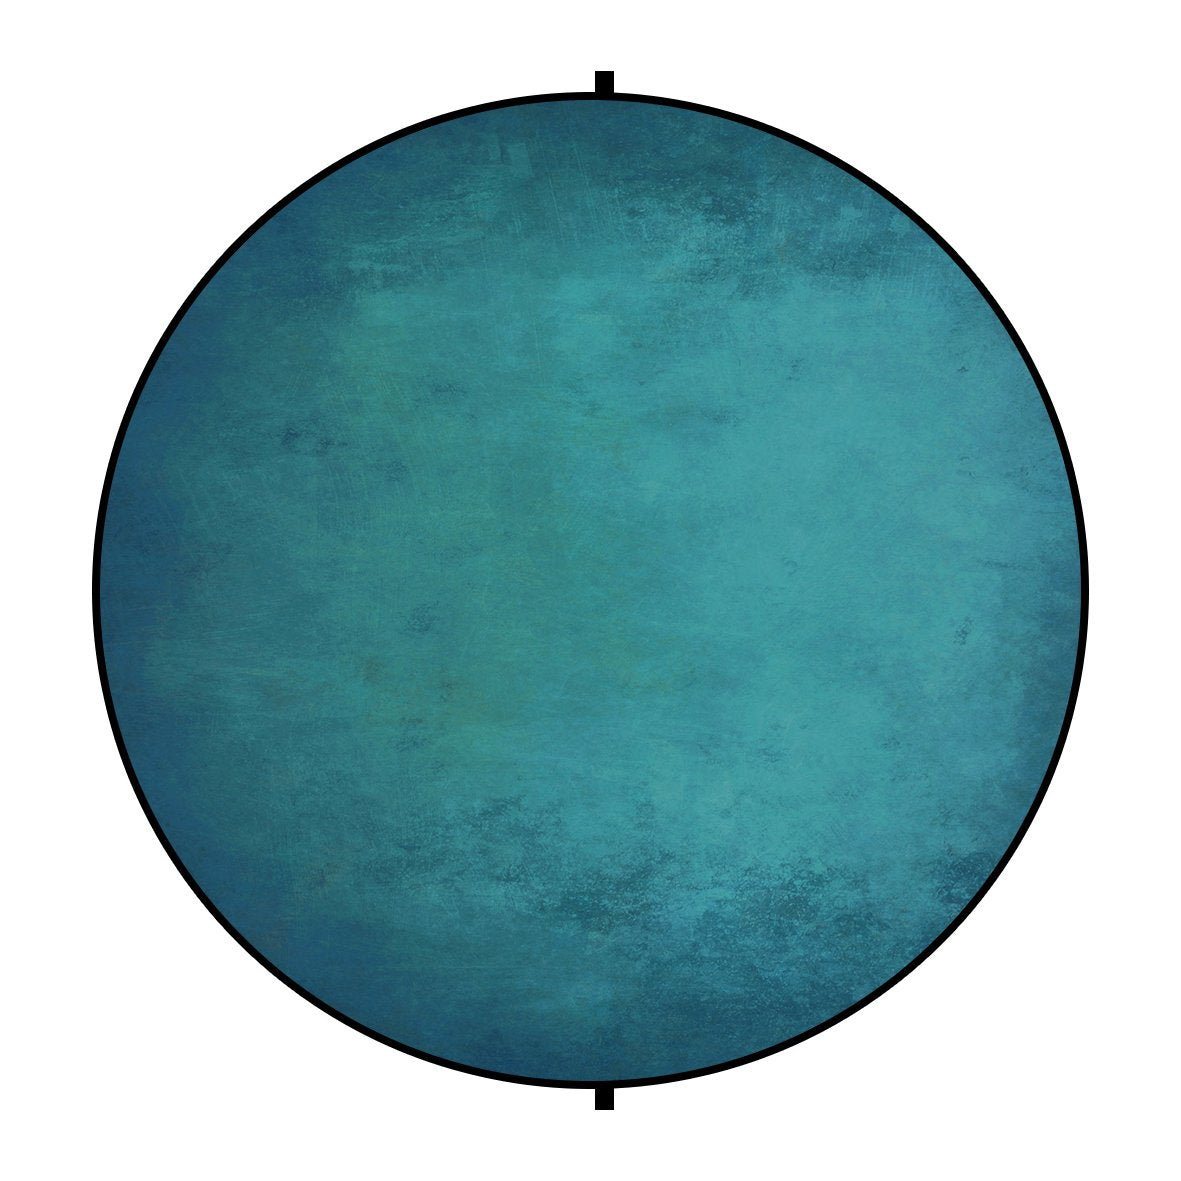 Kate Grey/Blue Abstract Mixed Round Collapsible Backdrop for Baby Photography 5X5ft(1.5x1.5m)